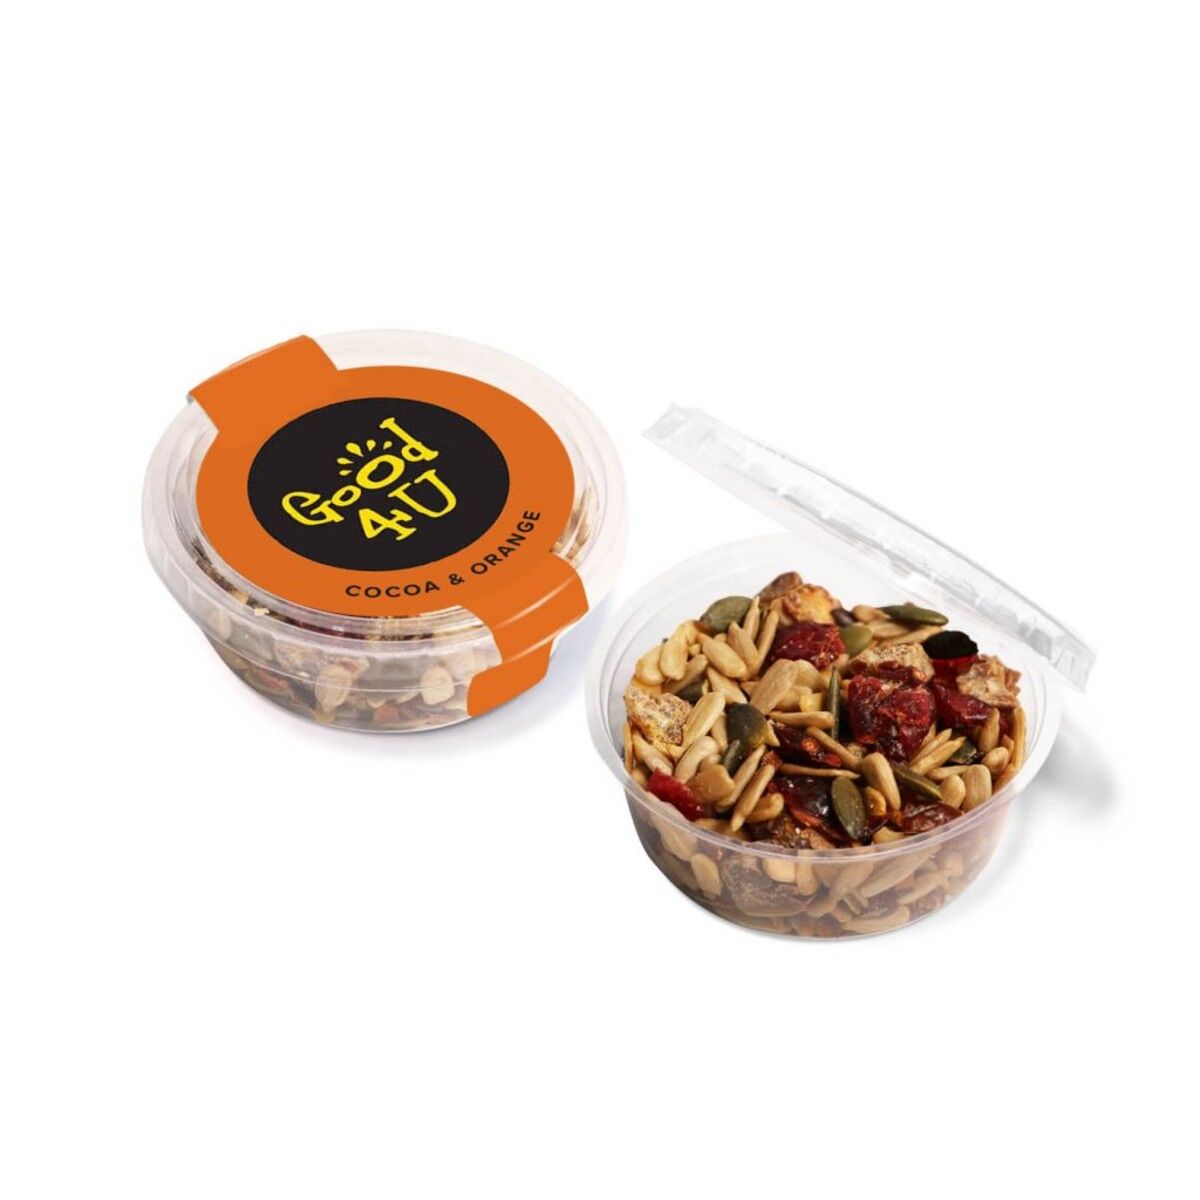 Snacks in compostable pots